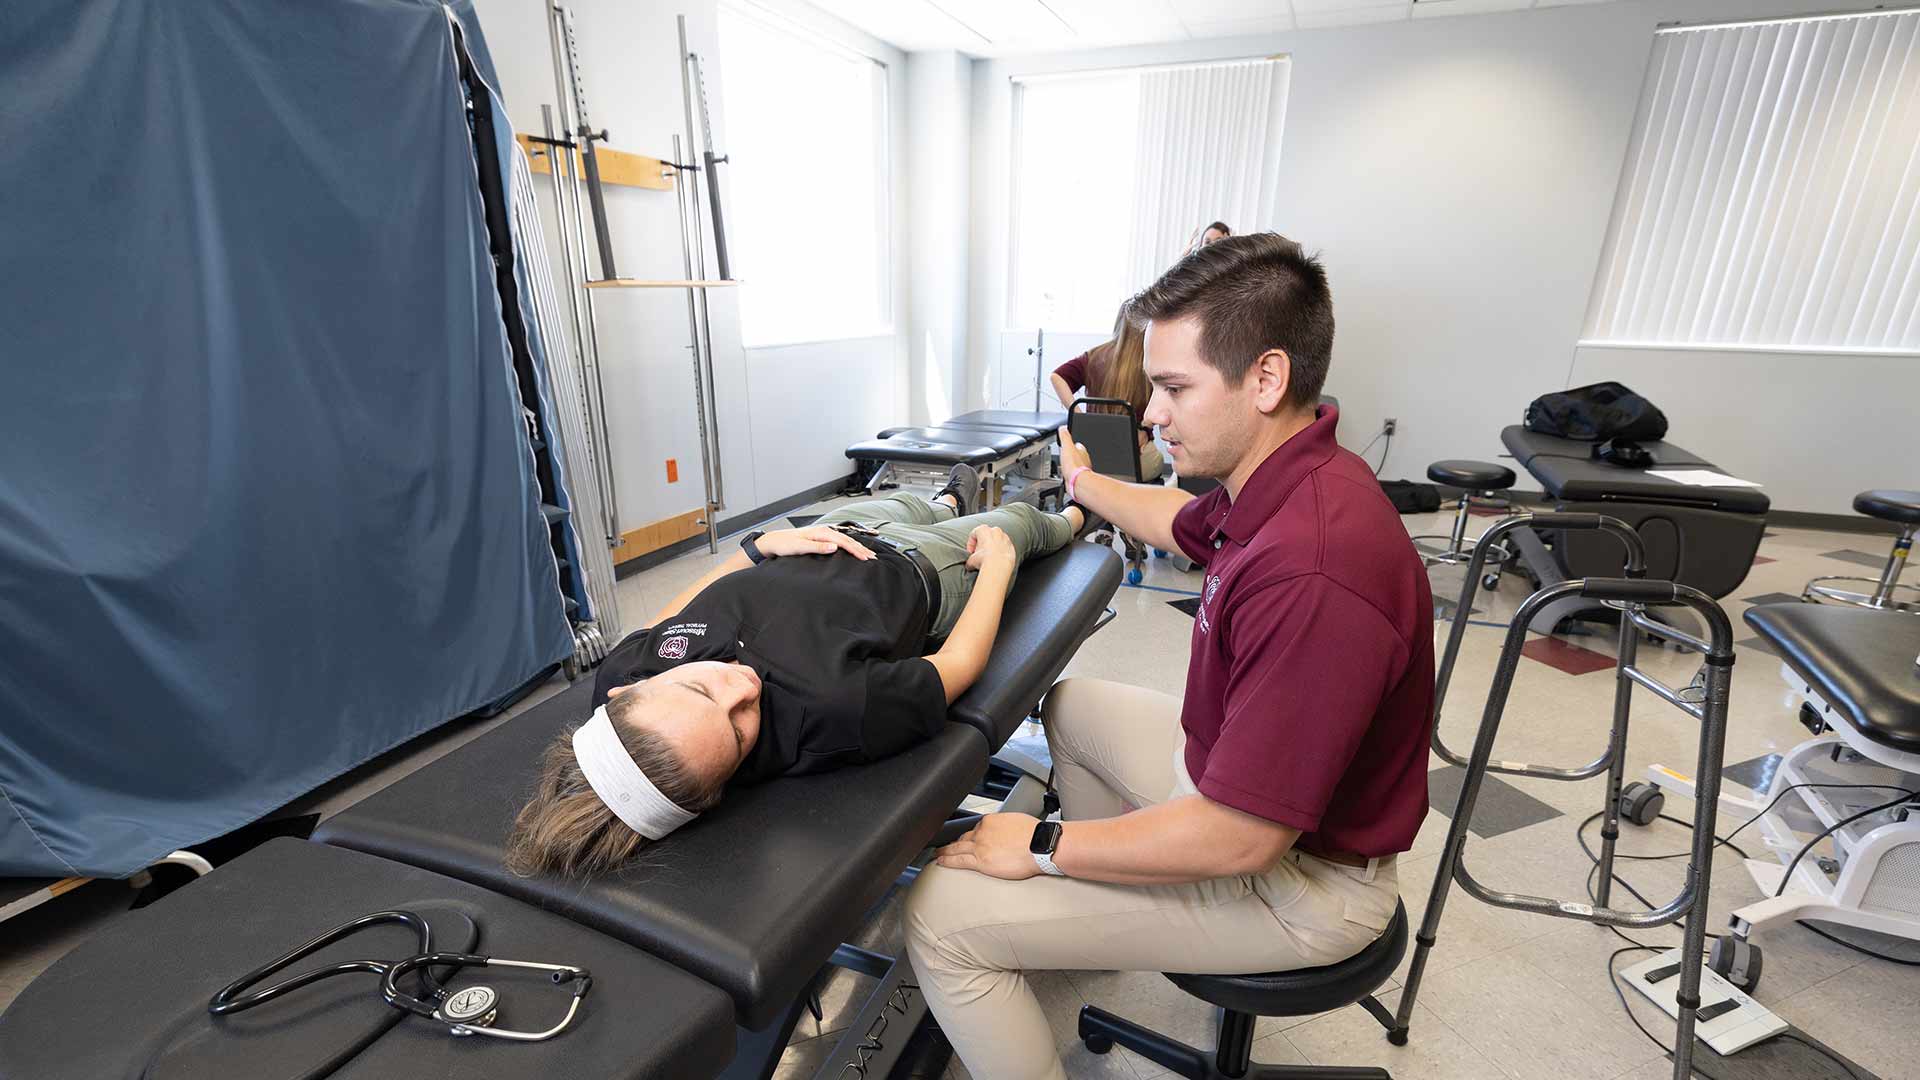 A physical therapy student seated in a chair examines another physical therapy student who is laying on a table.